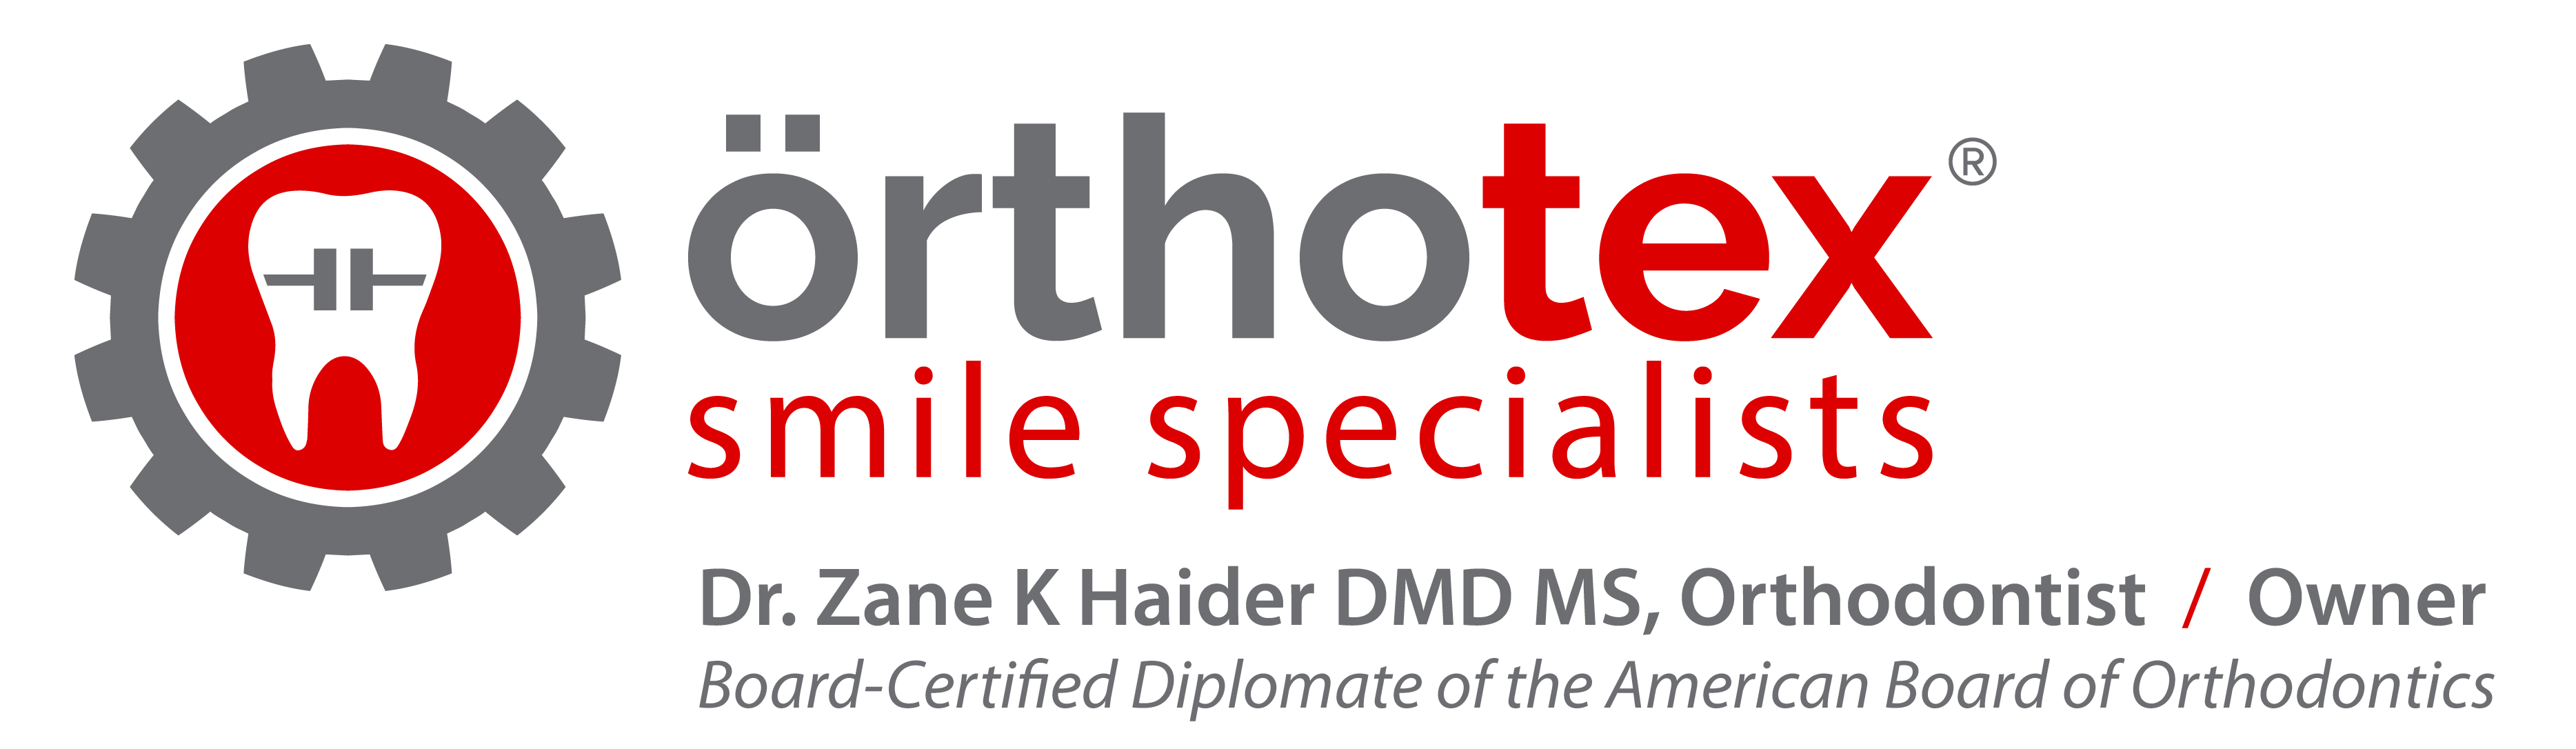 Orthotex Smile Specialists